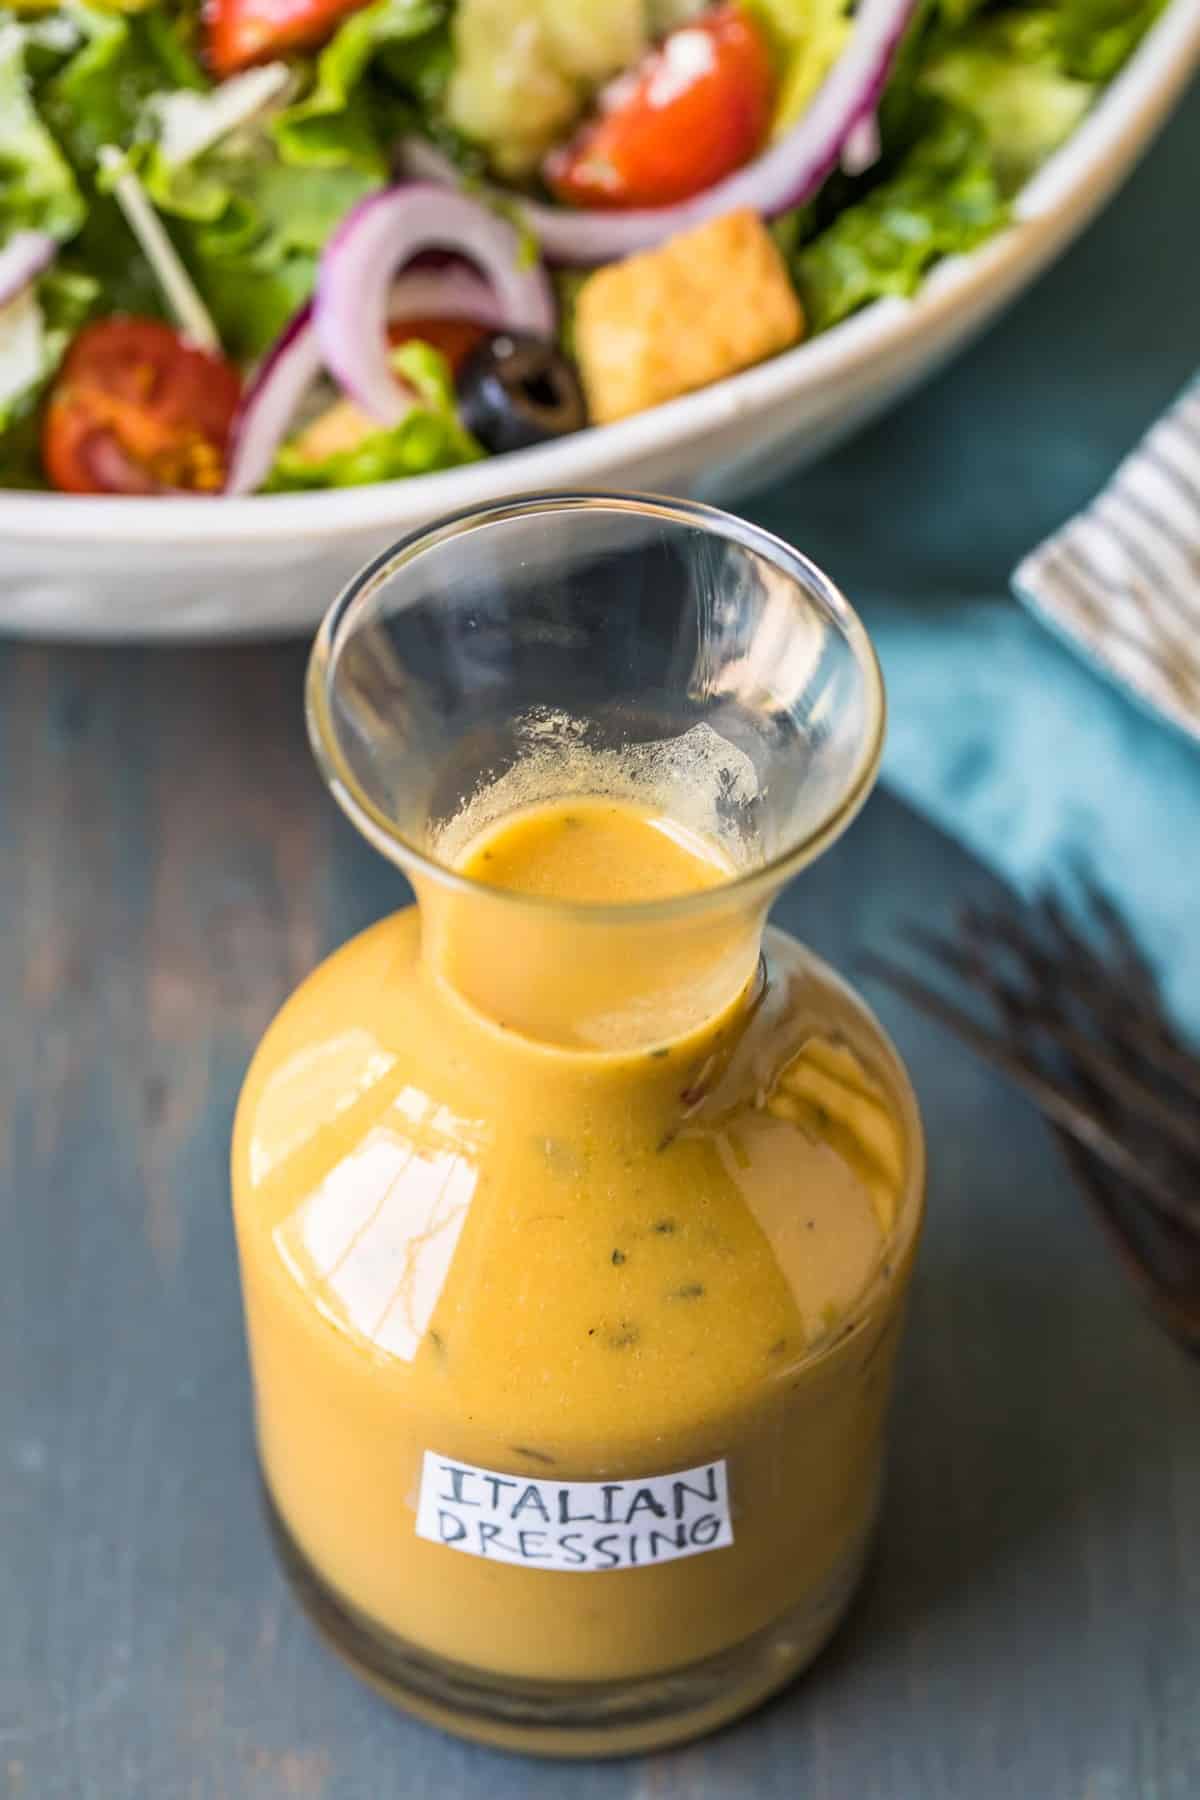 Italian dressing in a glass bottle in front of a salad